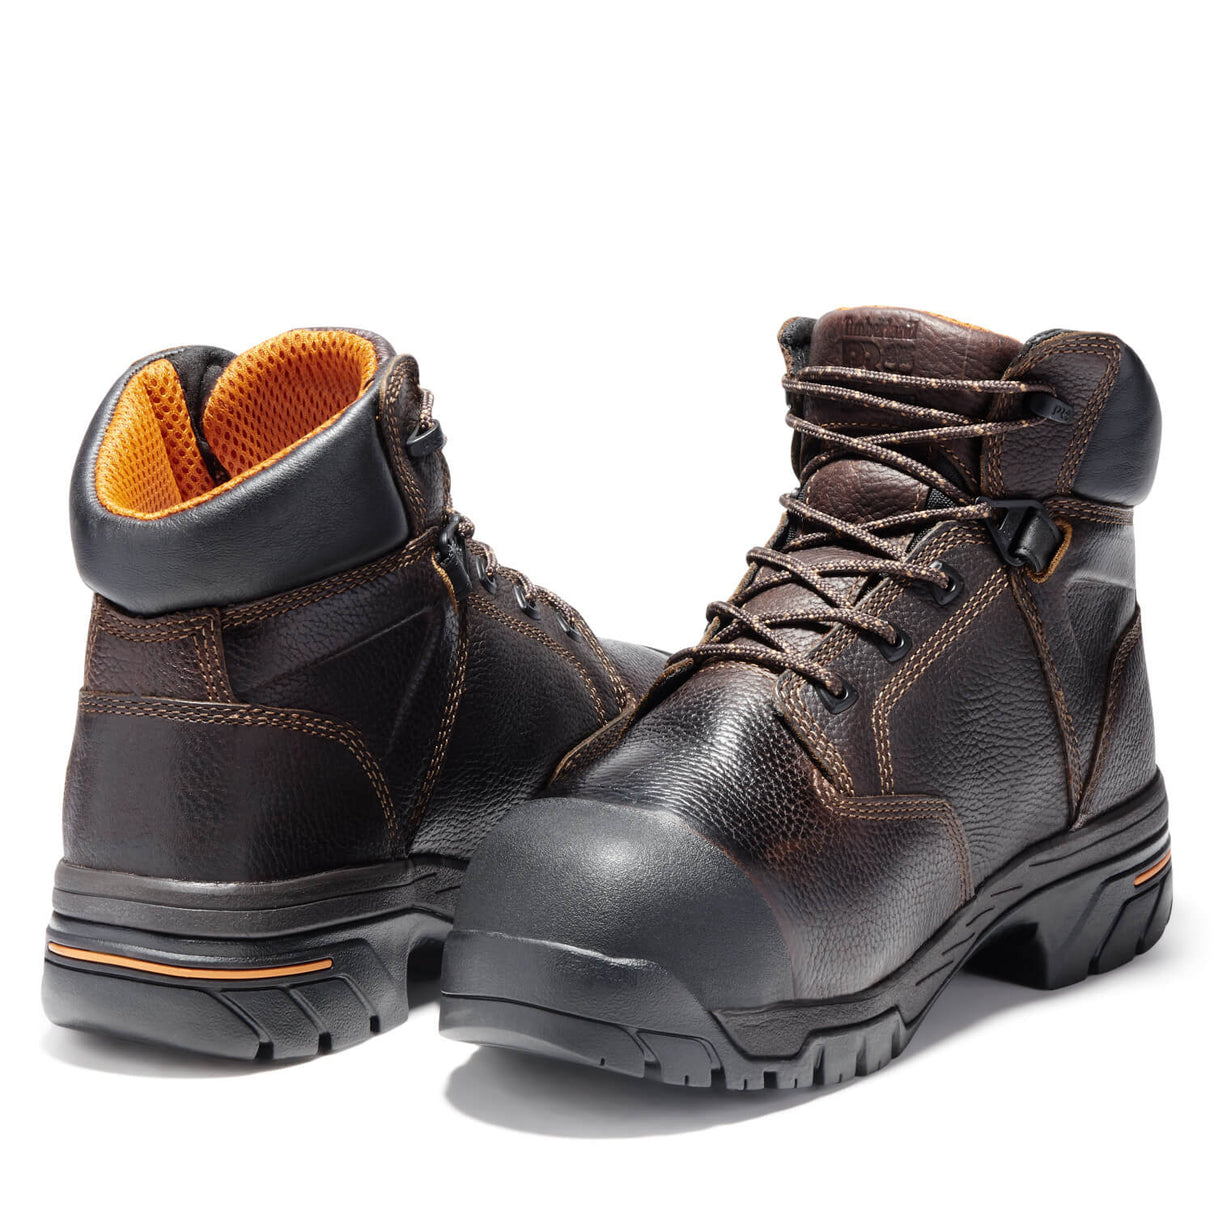 Timberland Pro-6 In Helix Img Composite-Toe Brown-Steel Toes-8